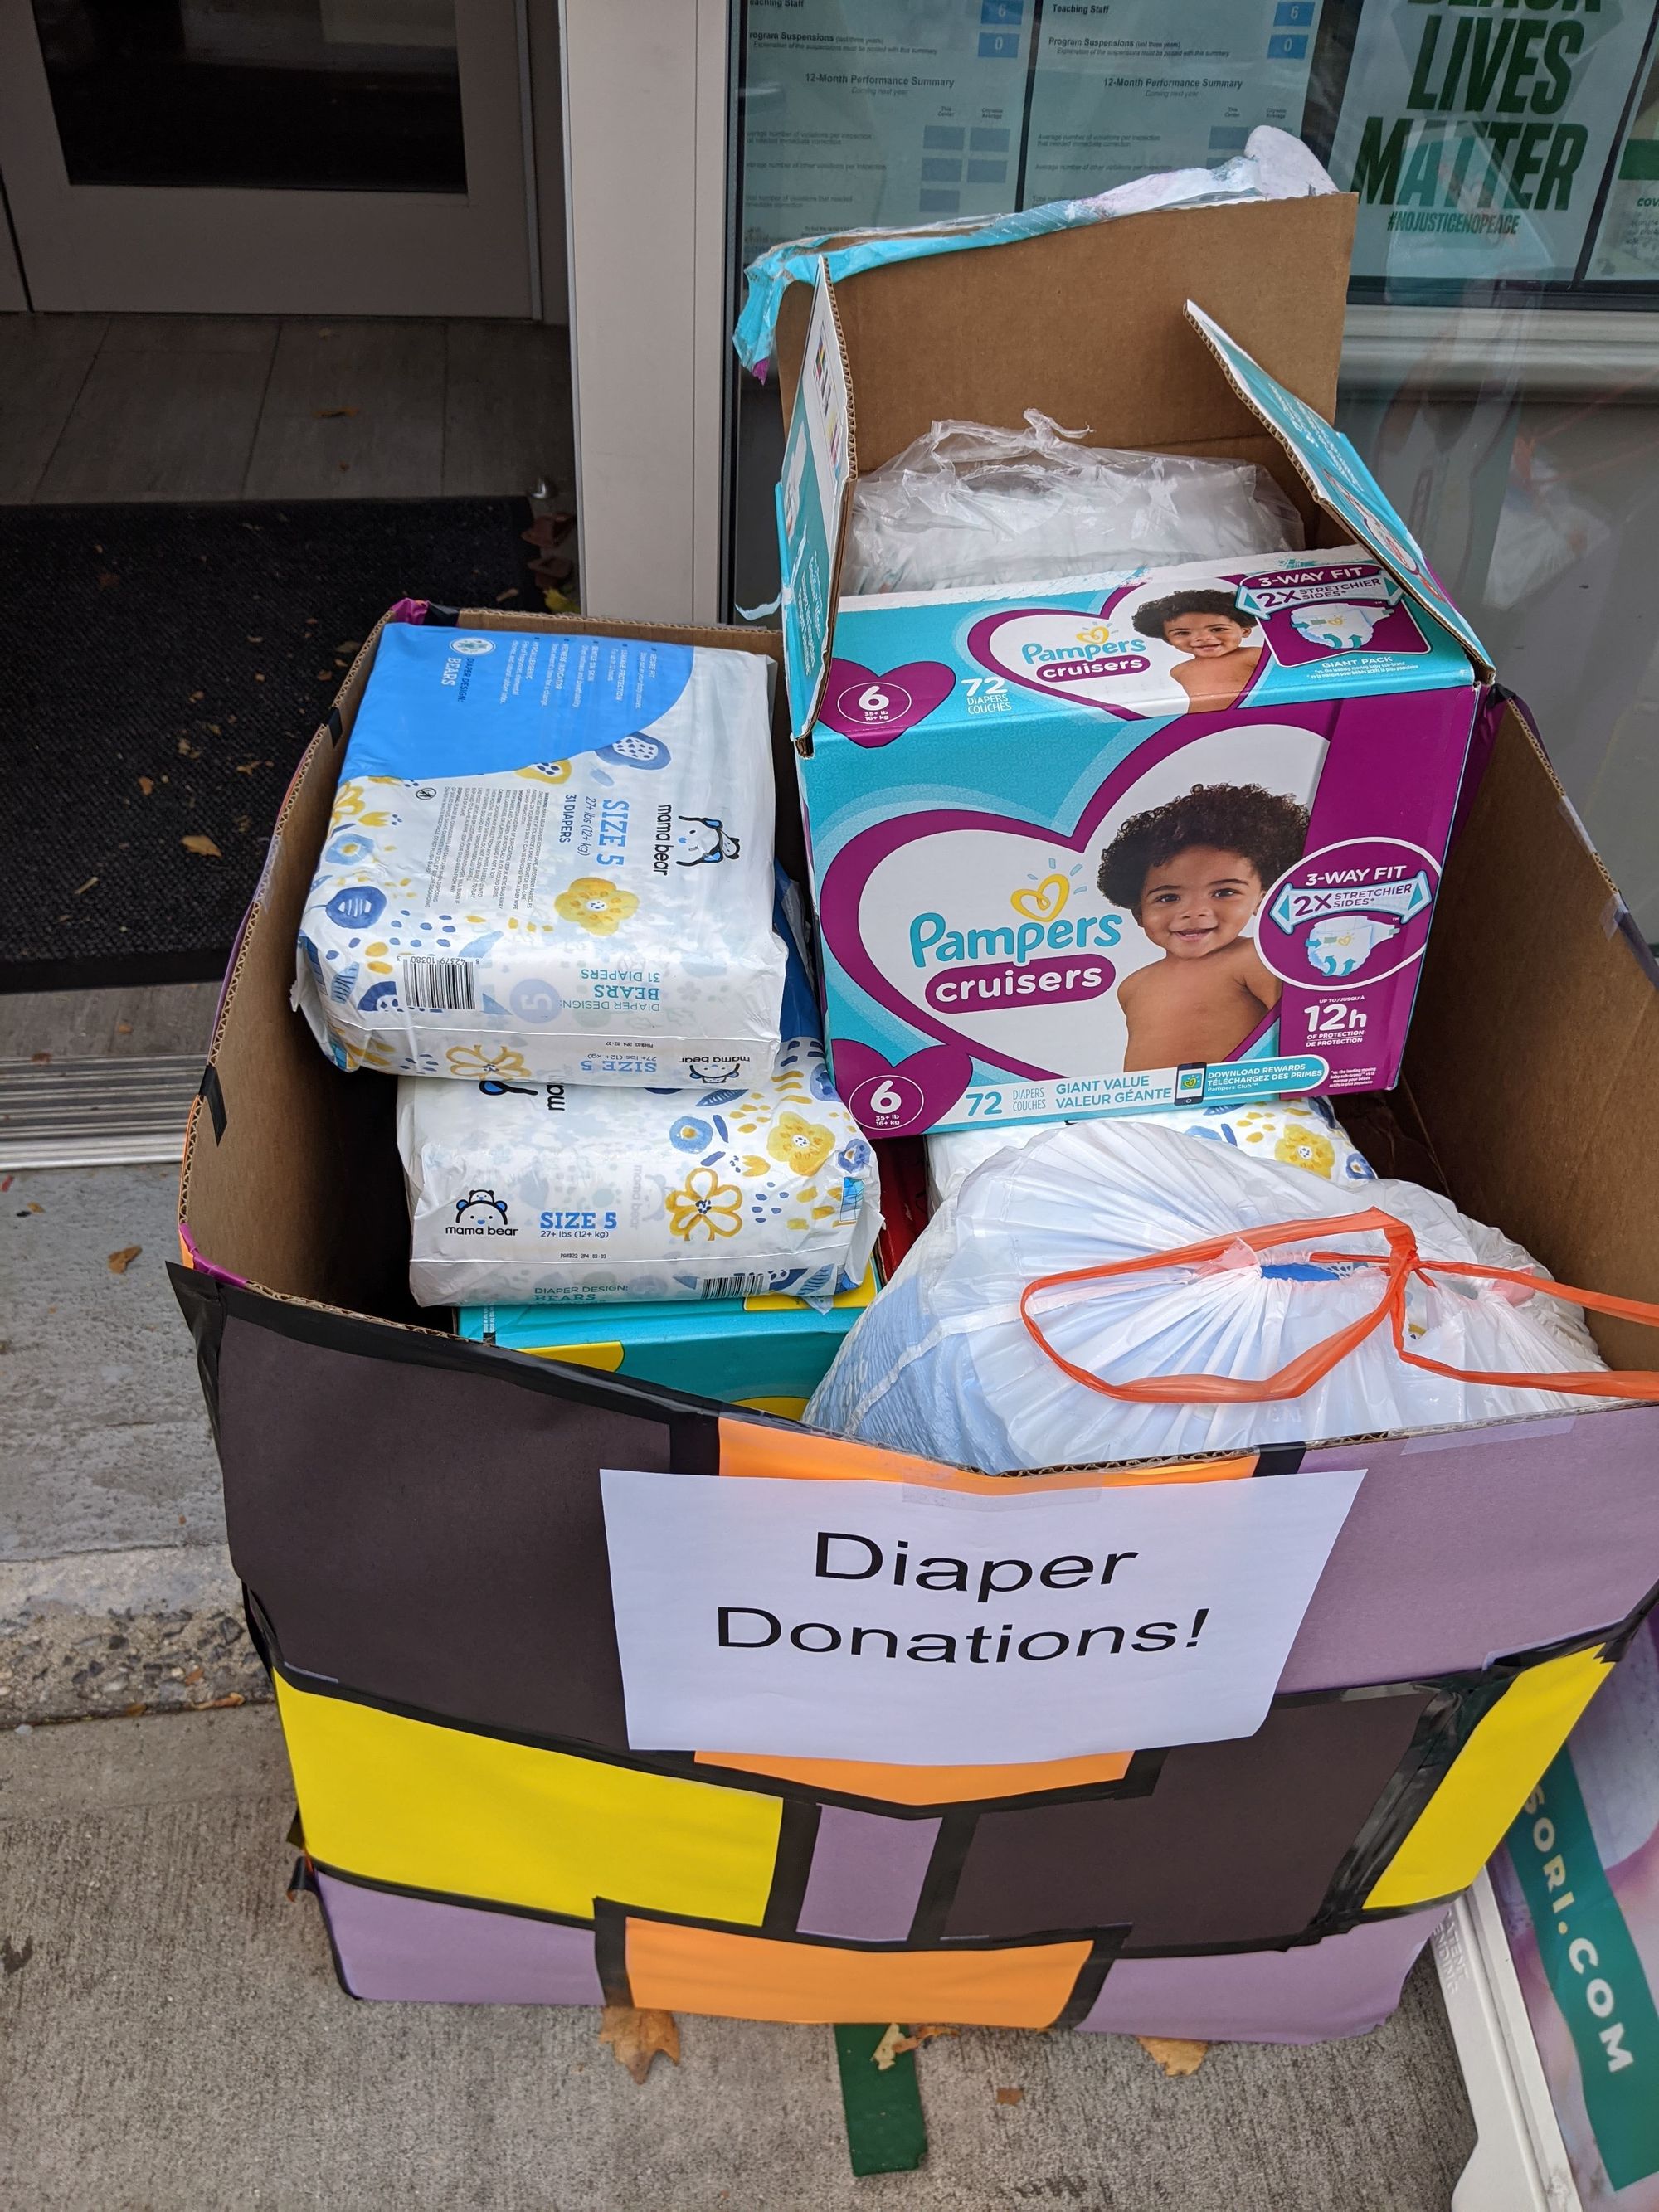 WBWMA Box of Donated Diapers